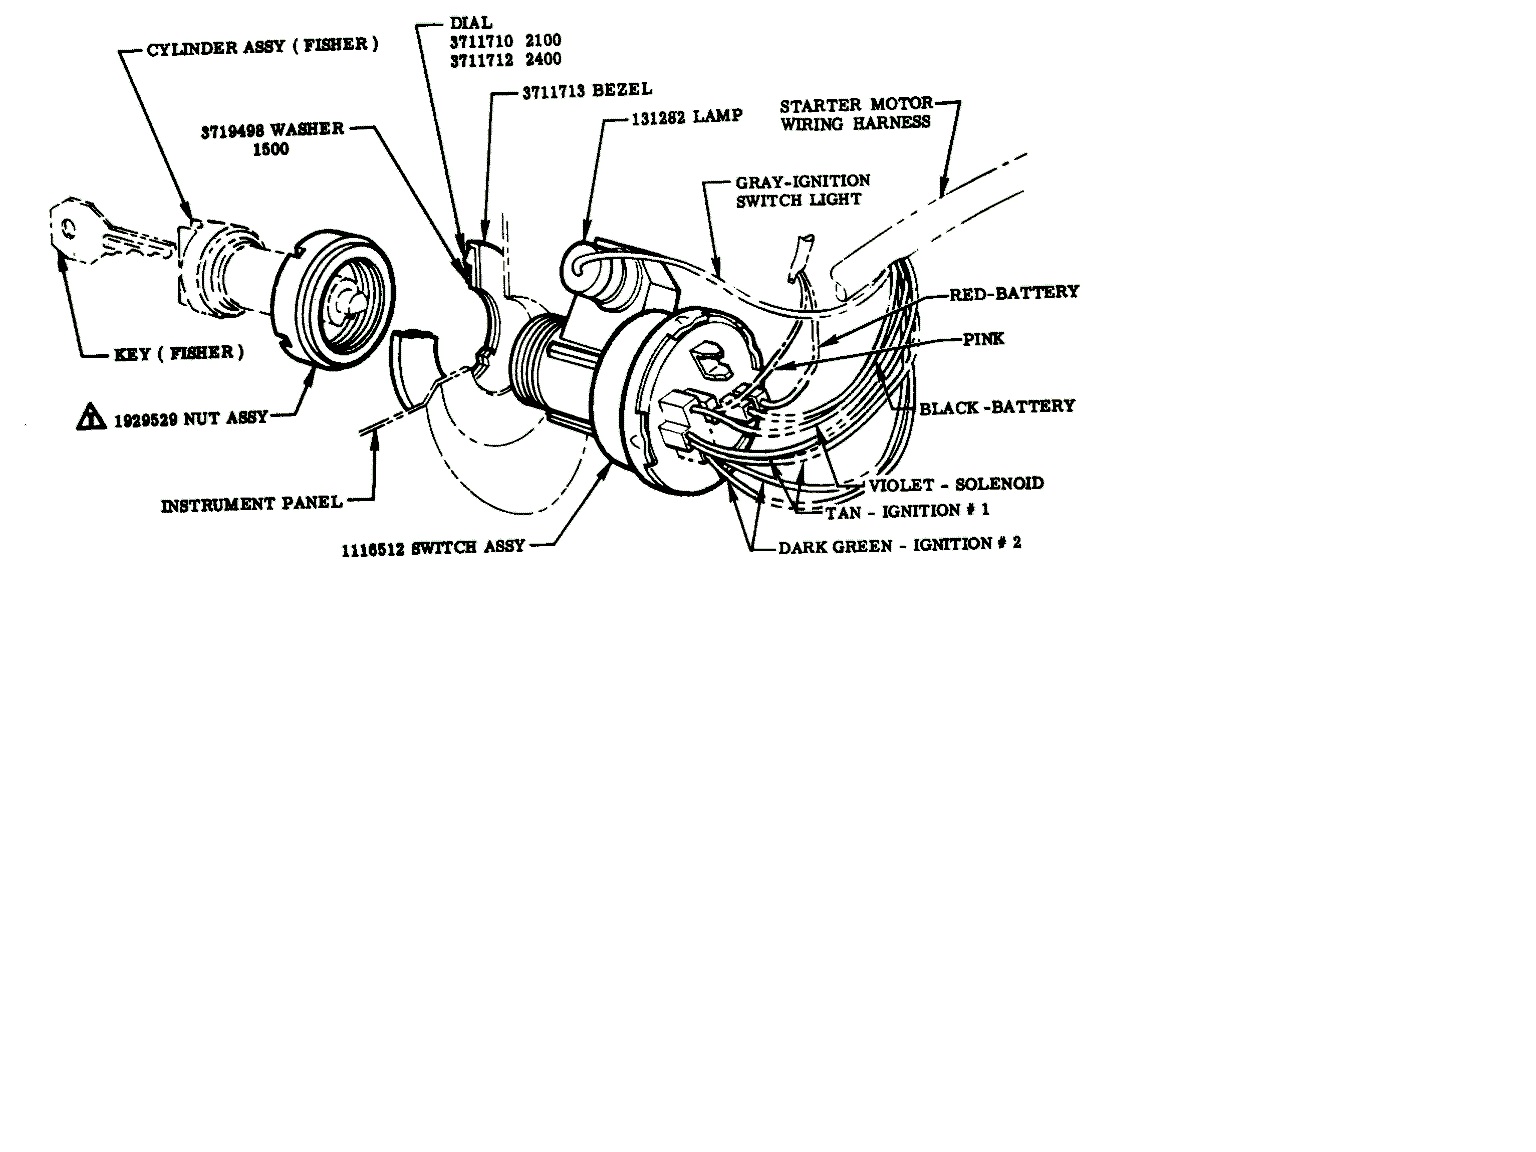 Technical - Ignition switch wiring diagram 1955.2 Chevy 3100 | The H.A.M.B.